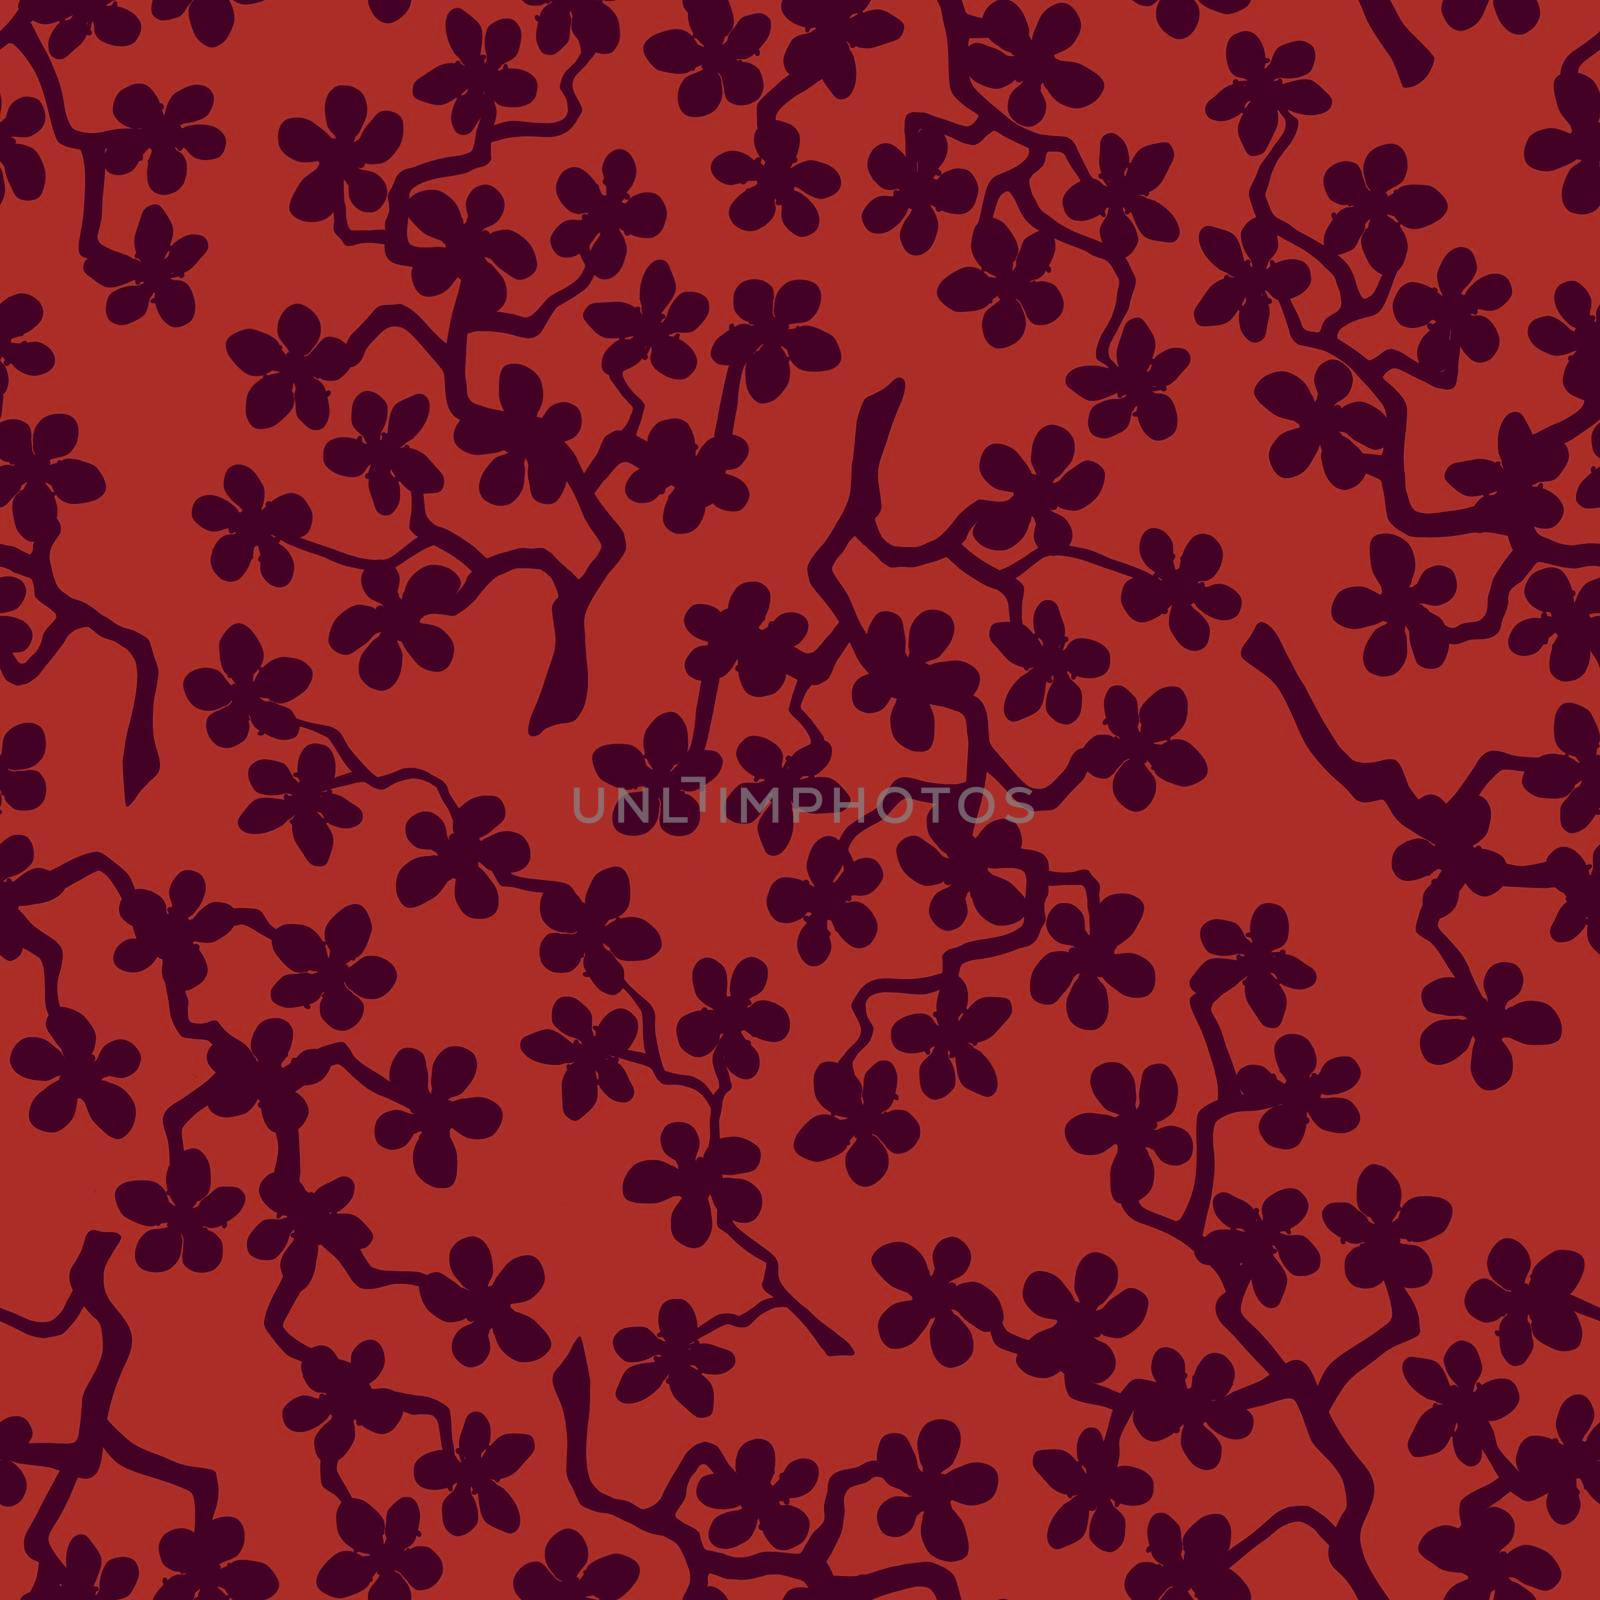 Seamless pattern with blossoming Japanese cherry sakura branches for fabric,packaging,wallpaper,textile decor,design, invitations,print,gift wrap,manufacturing.Burgundy flowers on brown background